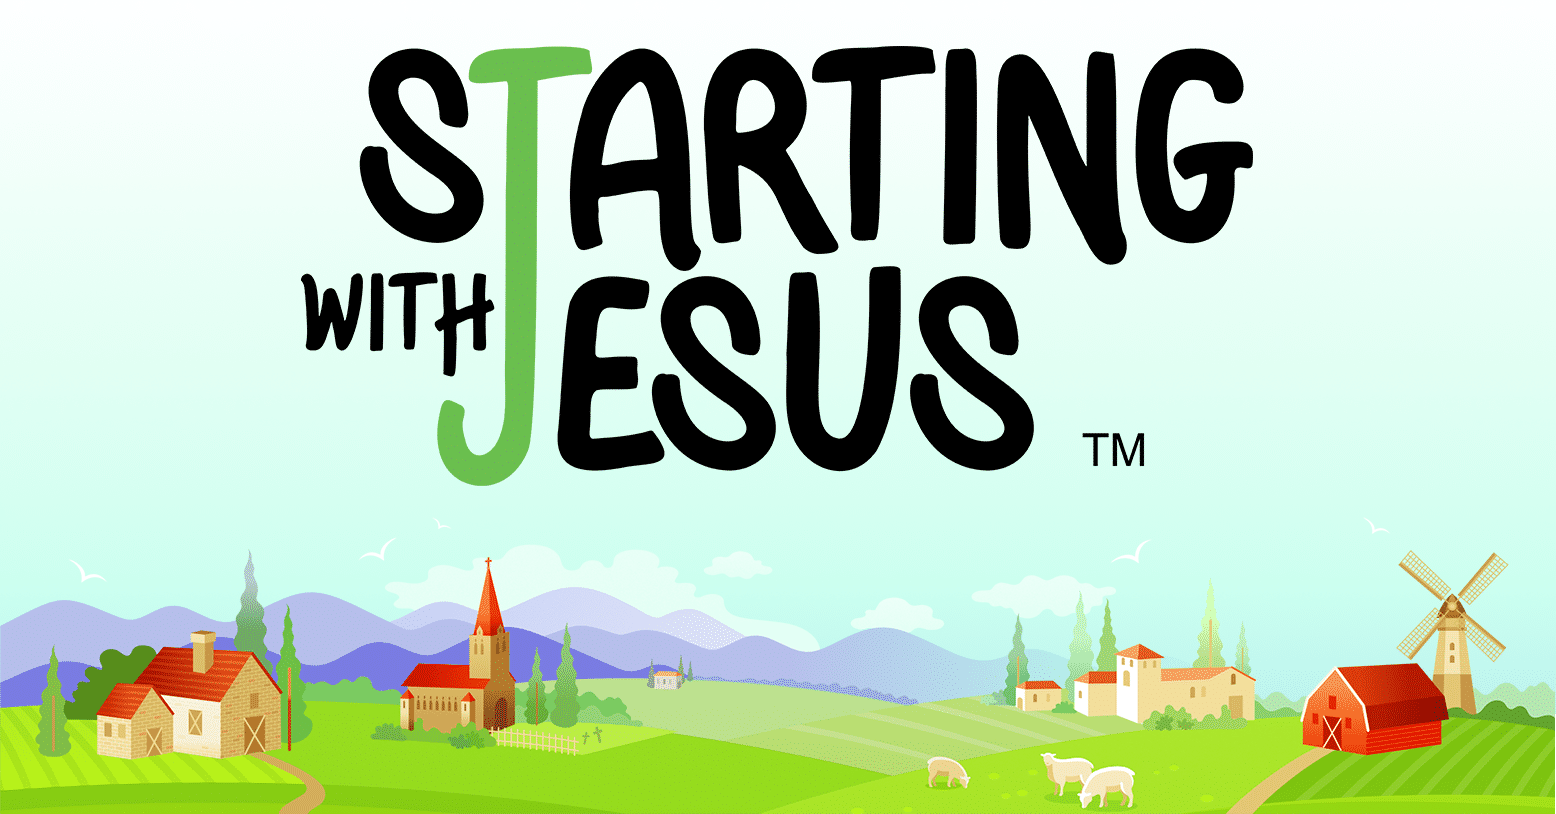 Starting With Jesus” is Growing Up!